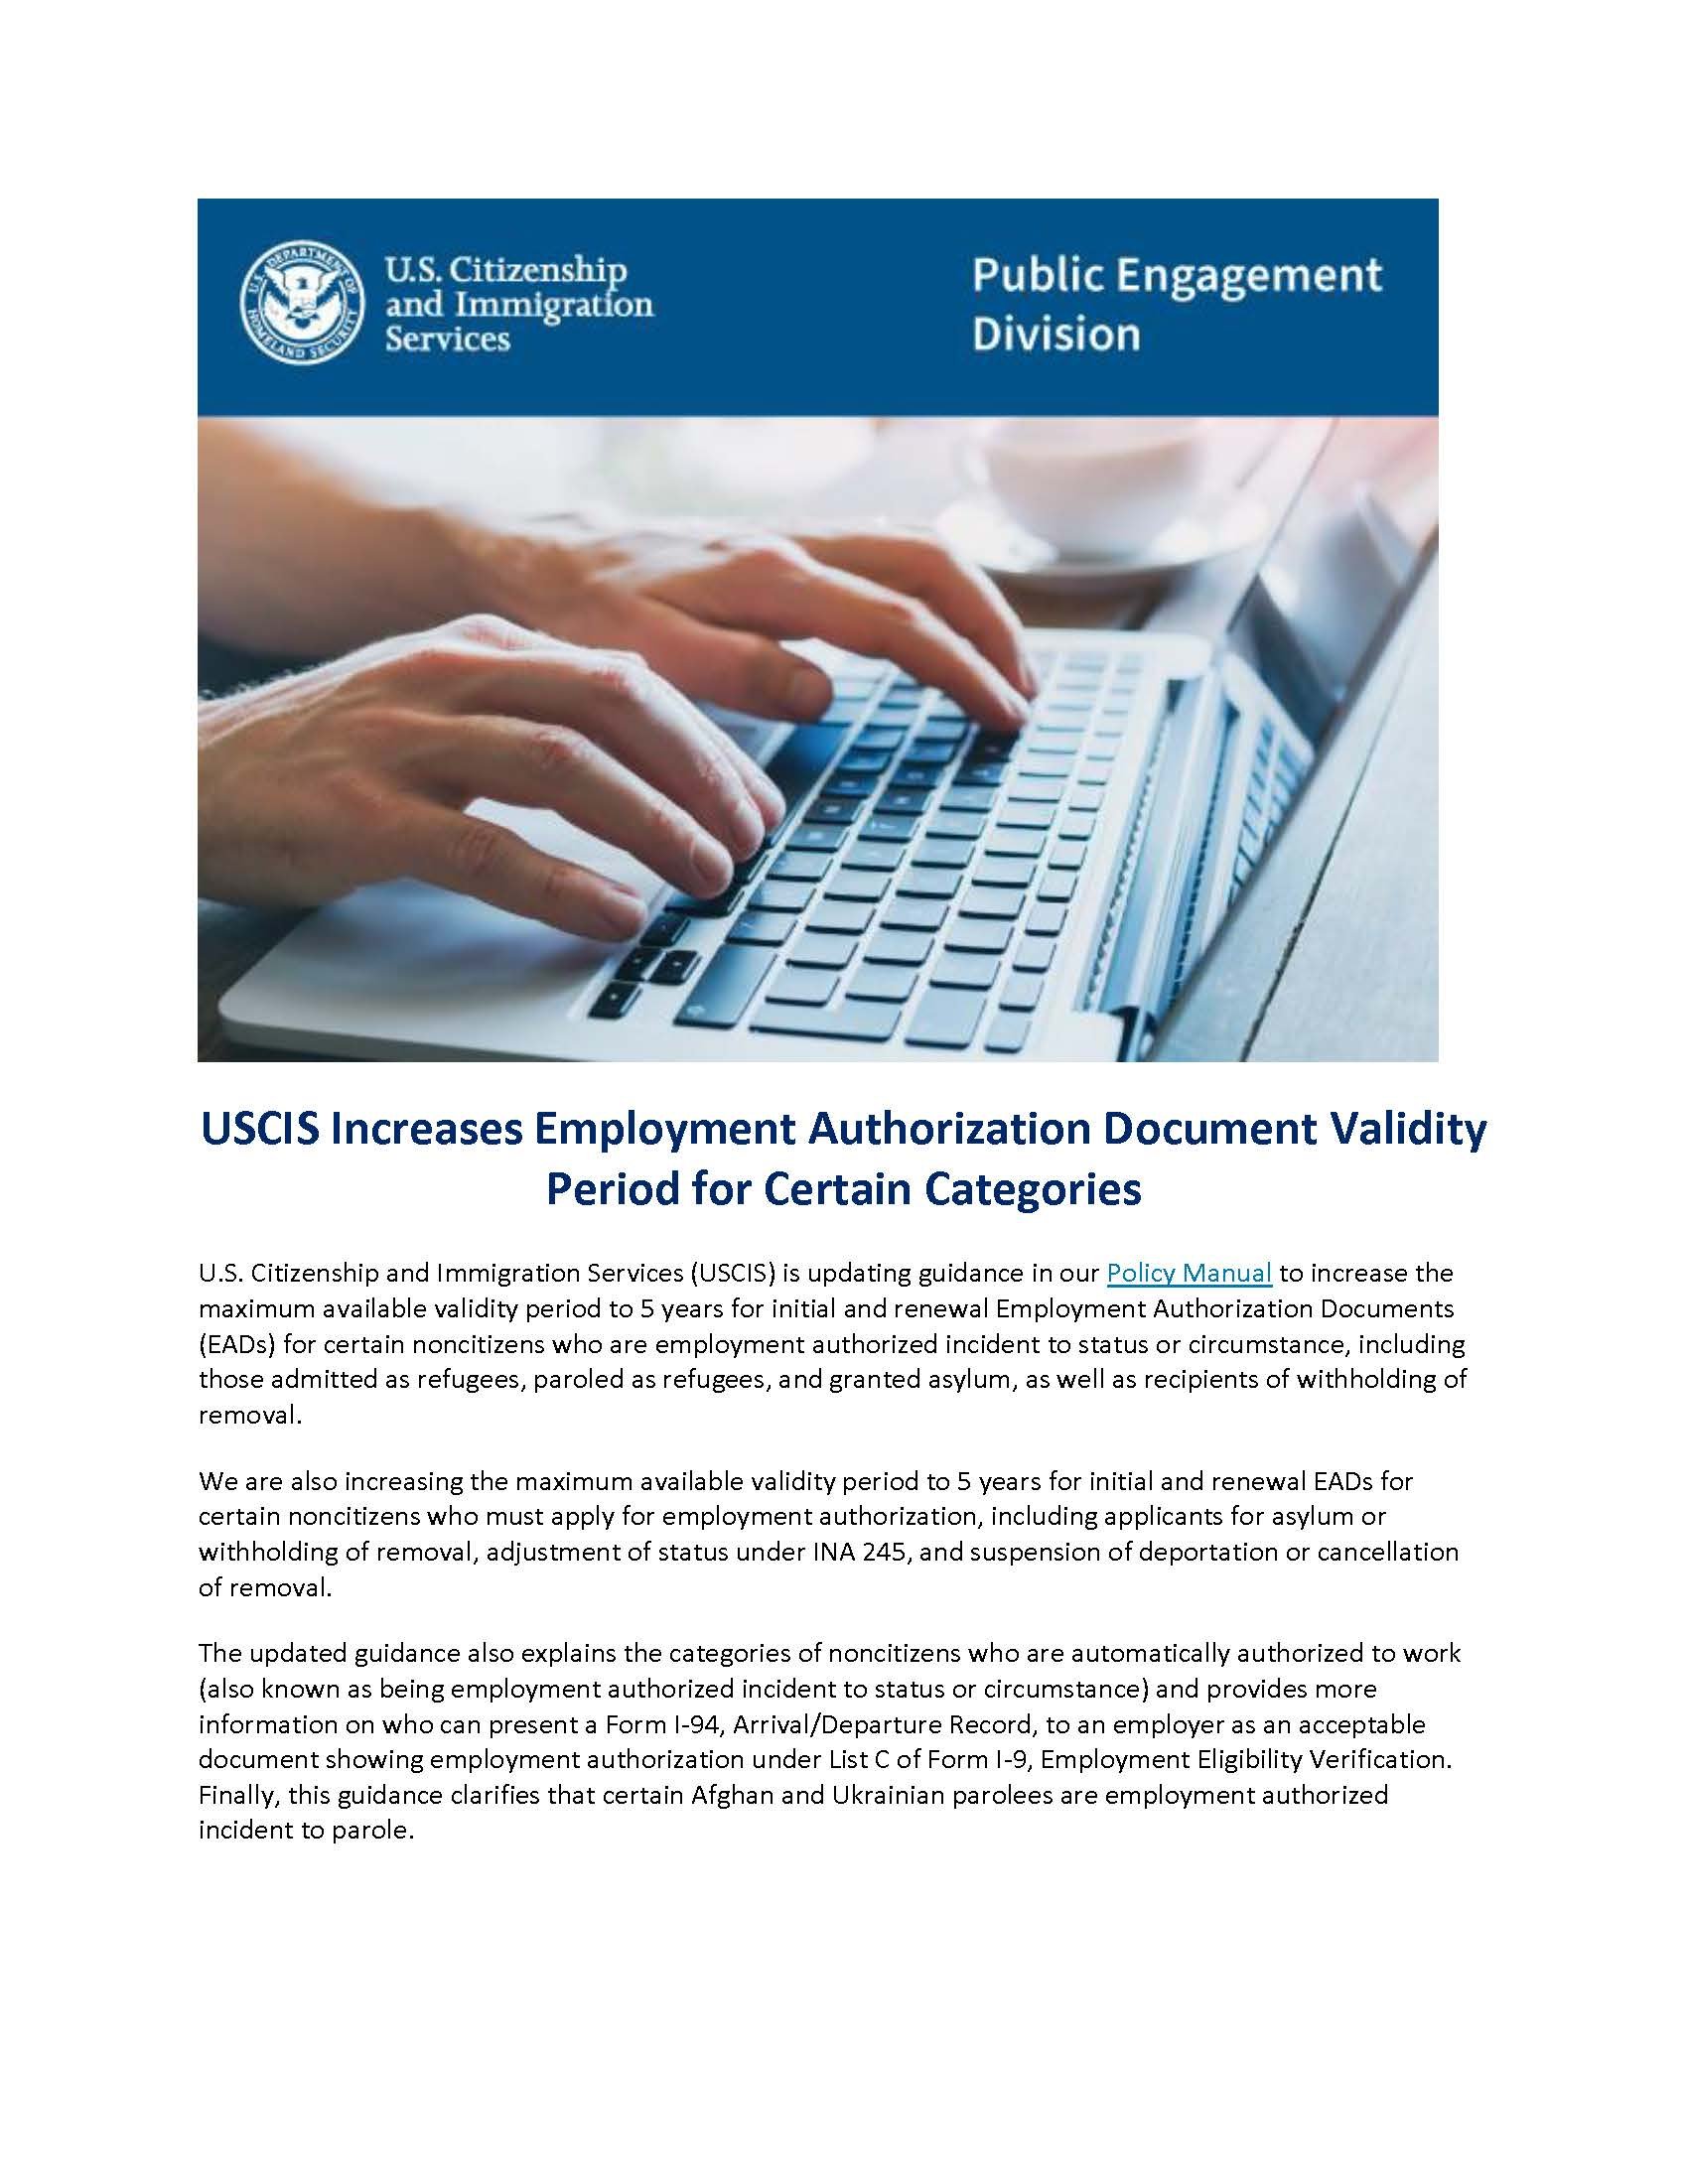 USCIS Increases Employment Authorization Document Validity Period for Certain Categories_Page_1.jpg